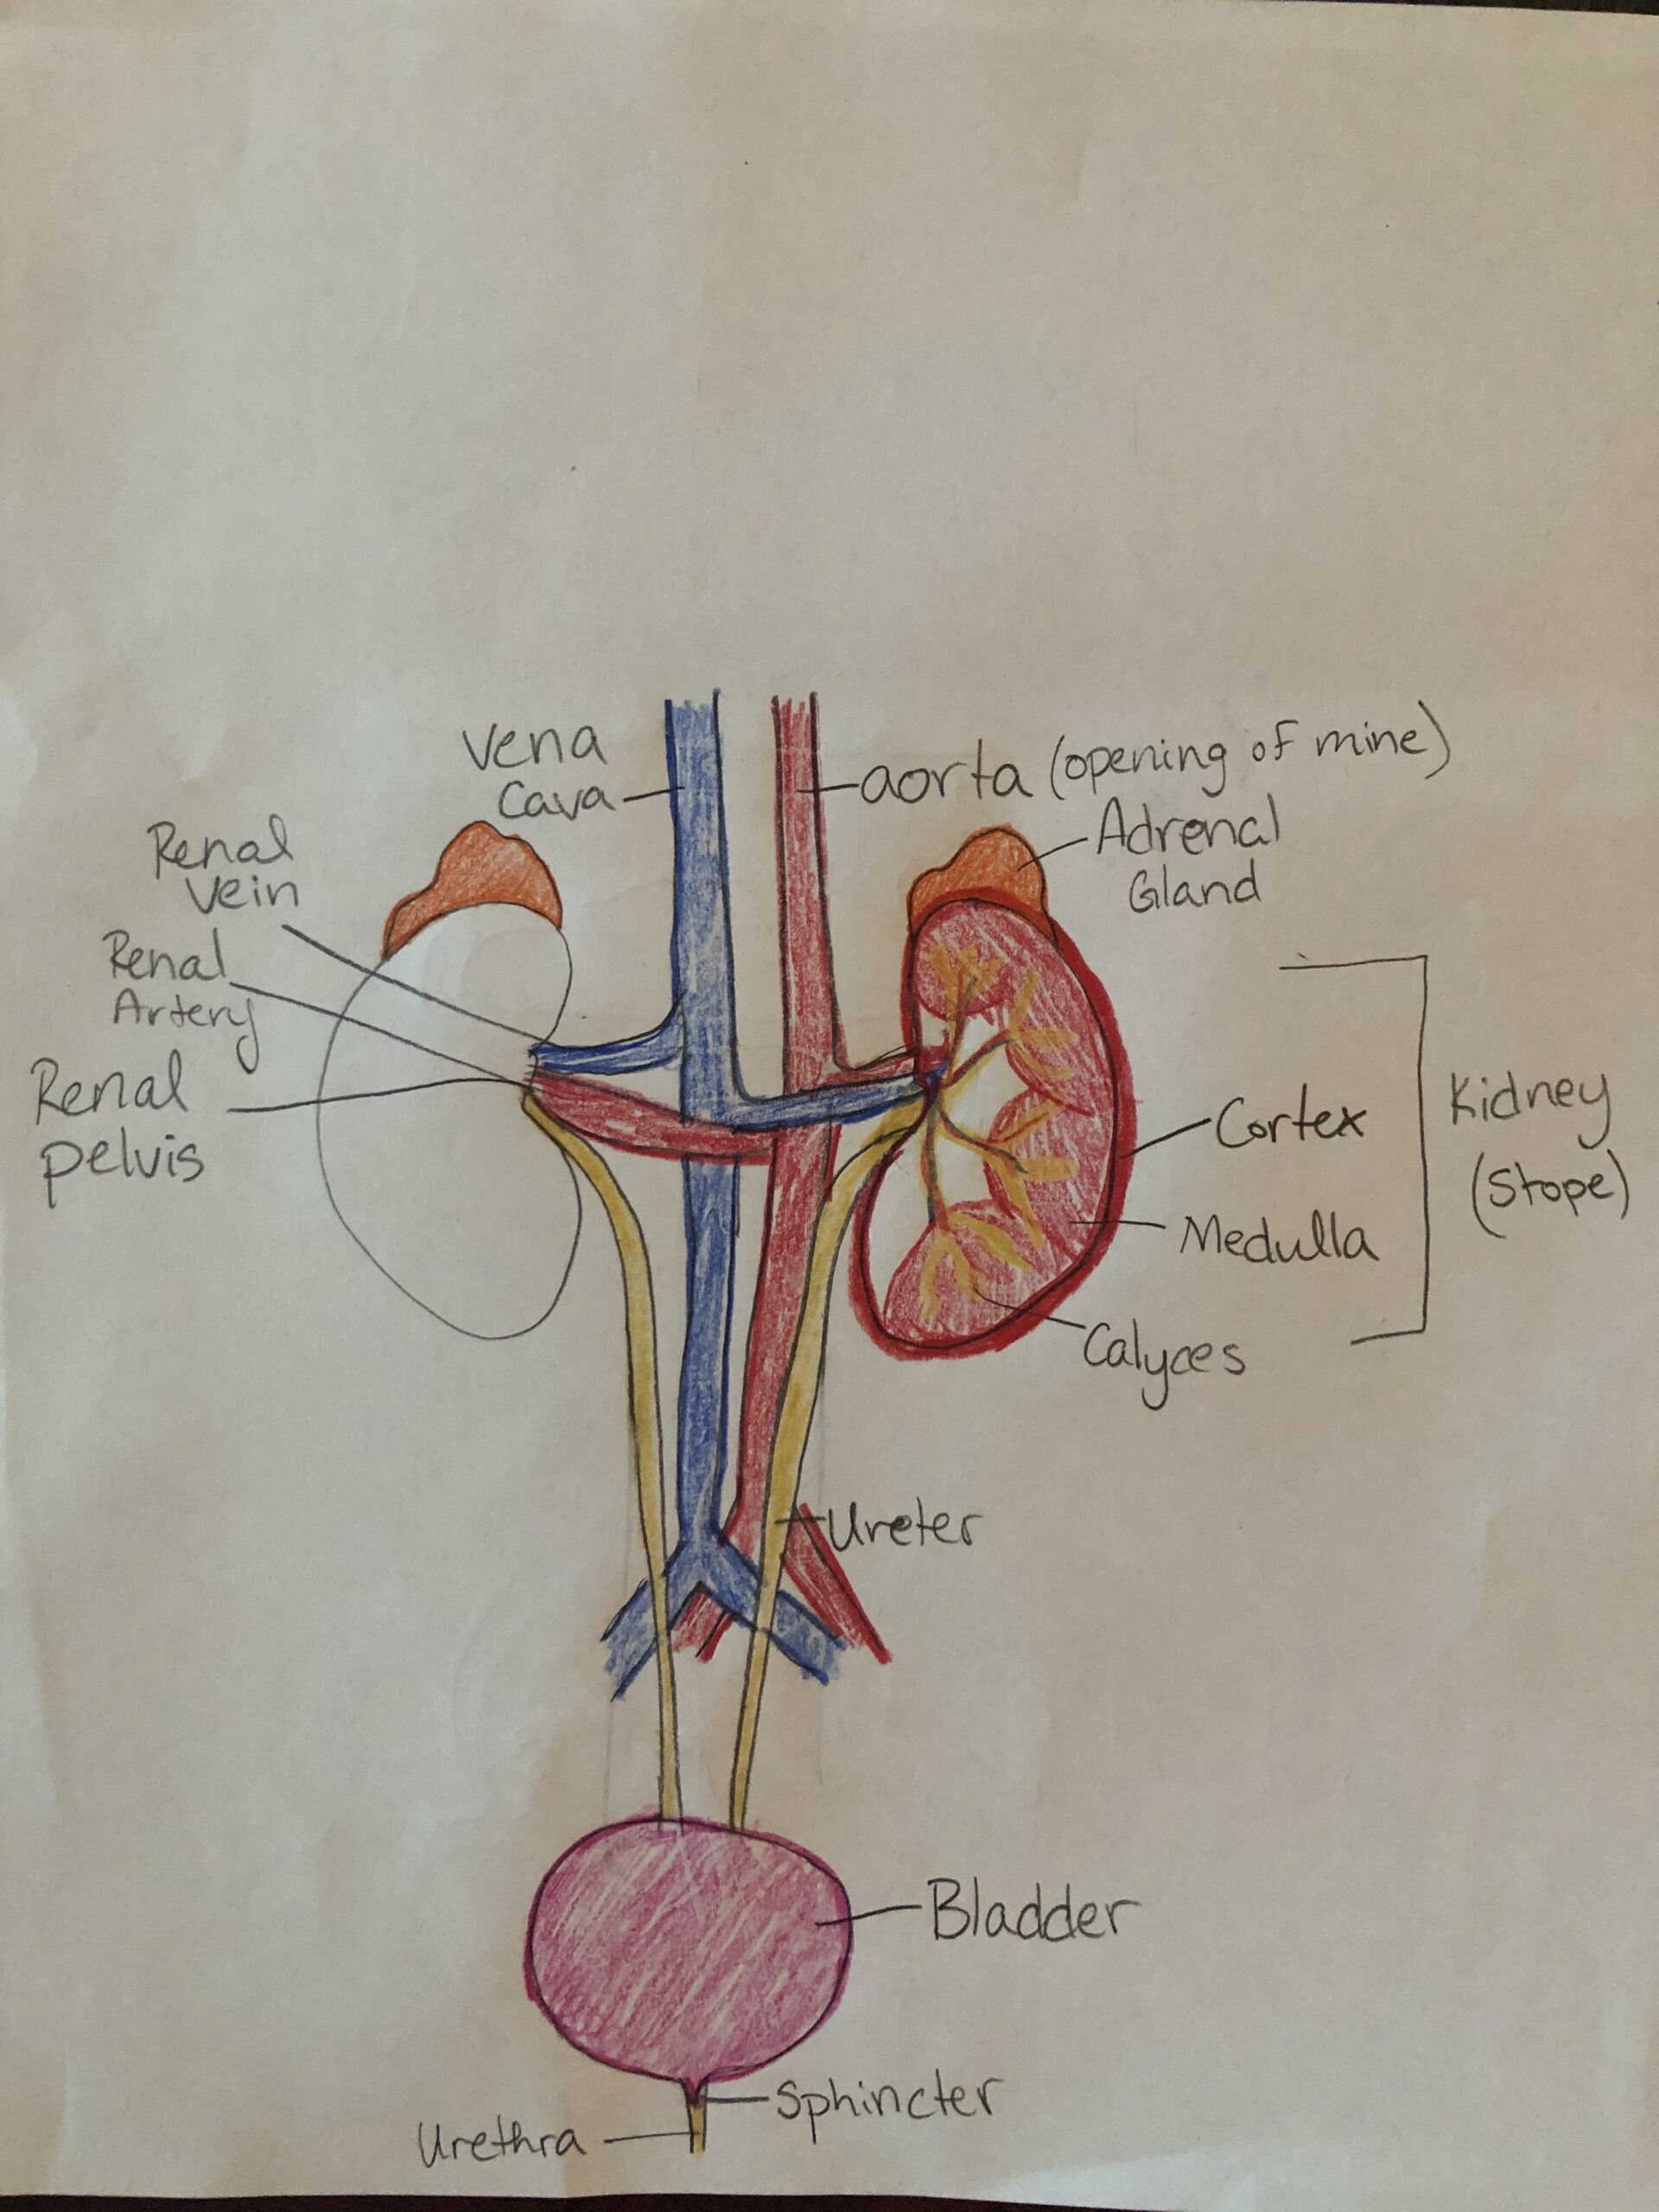 Mining into the Renal System